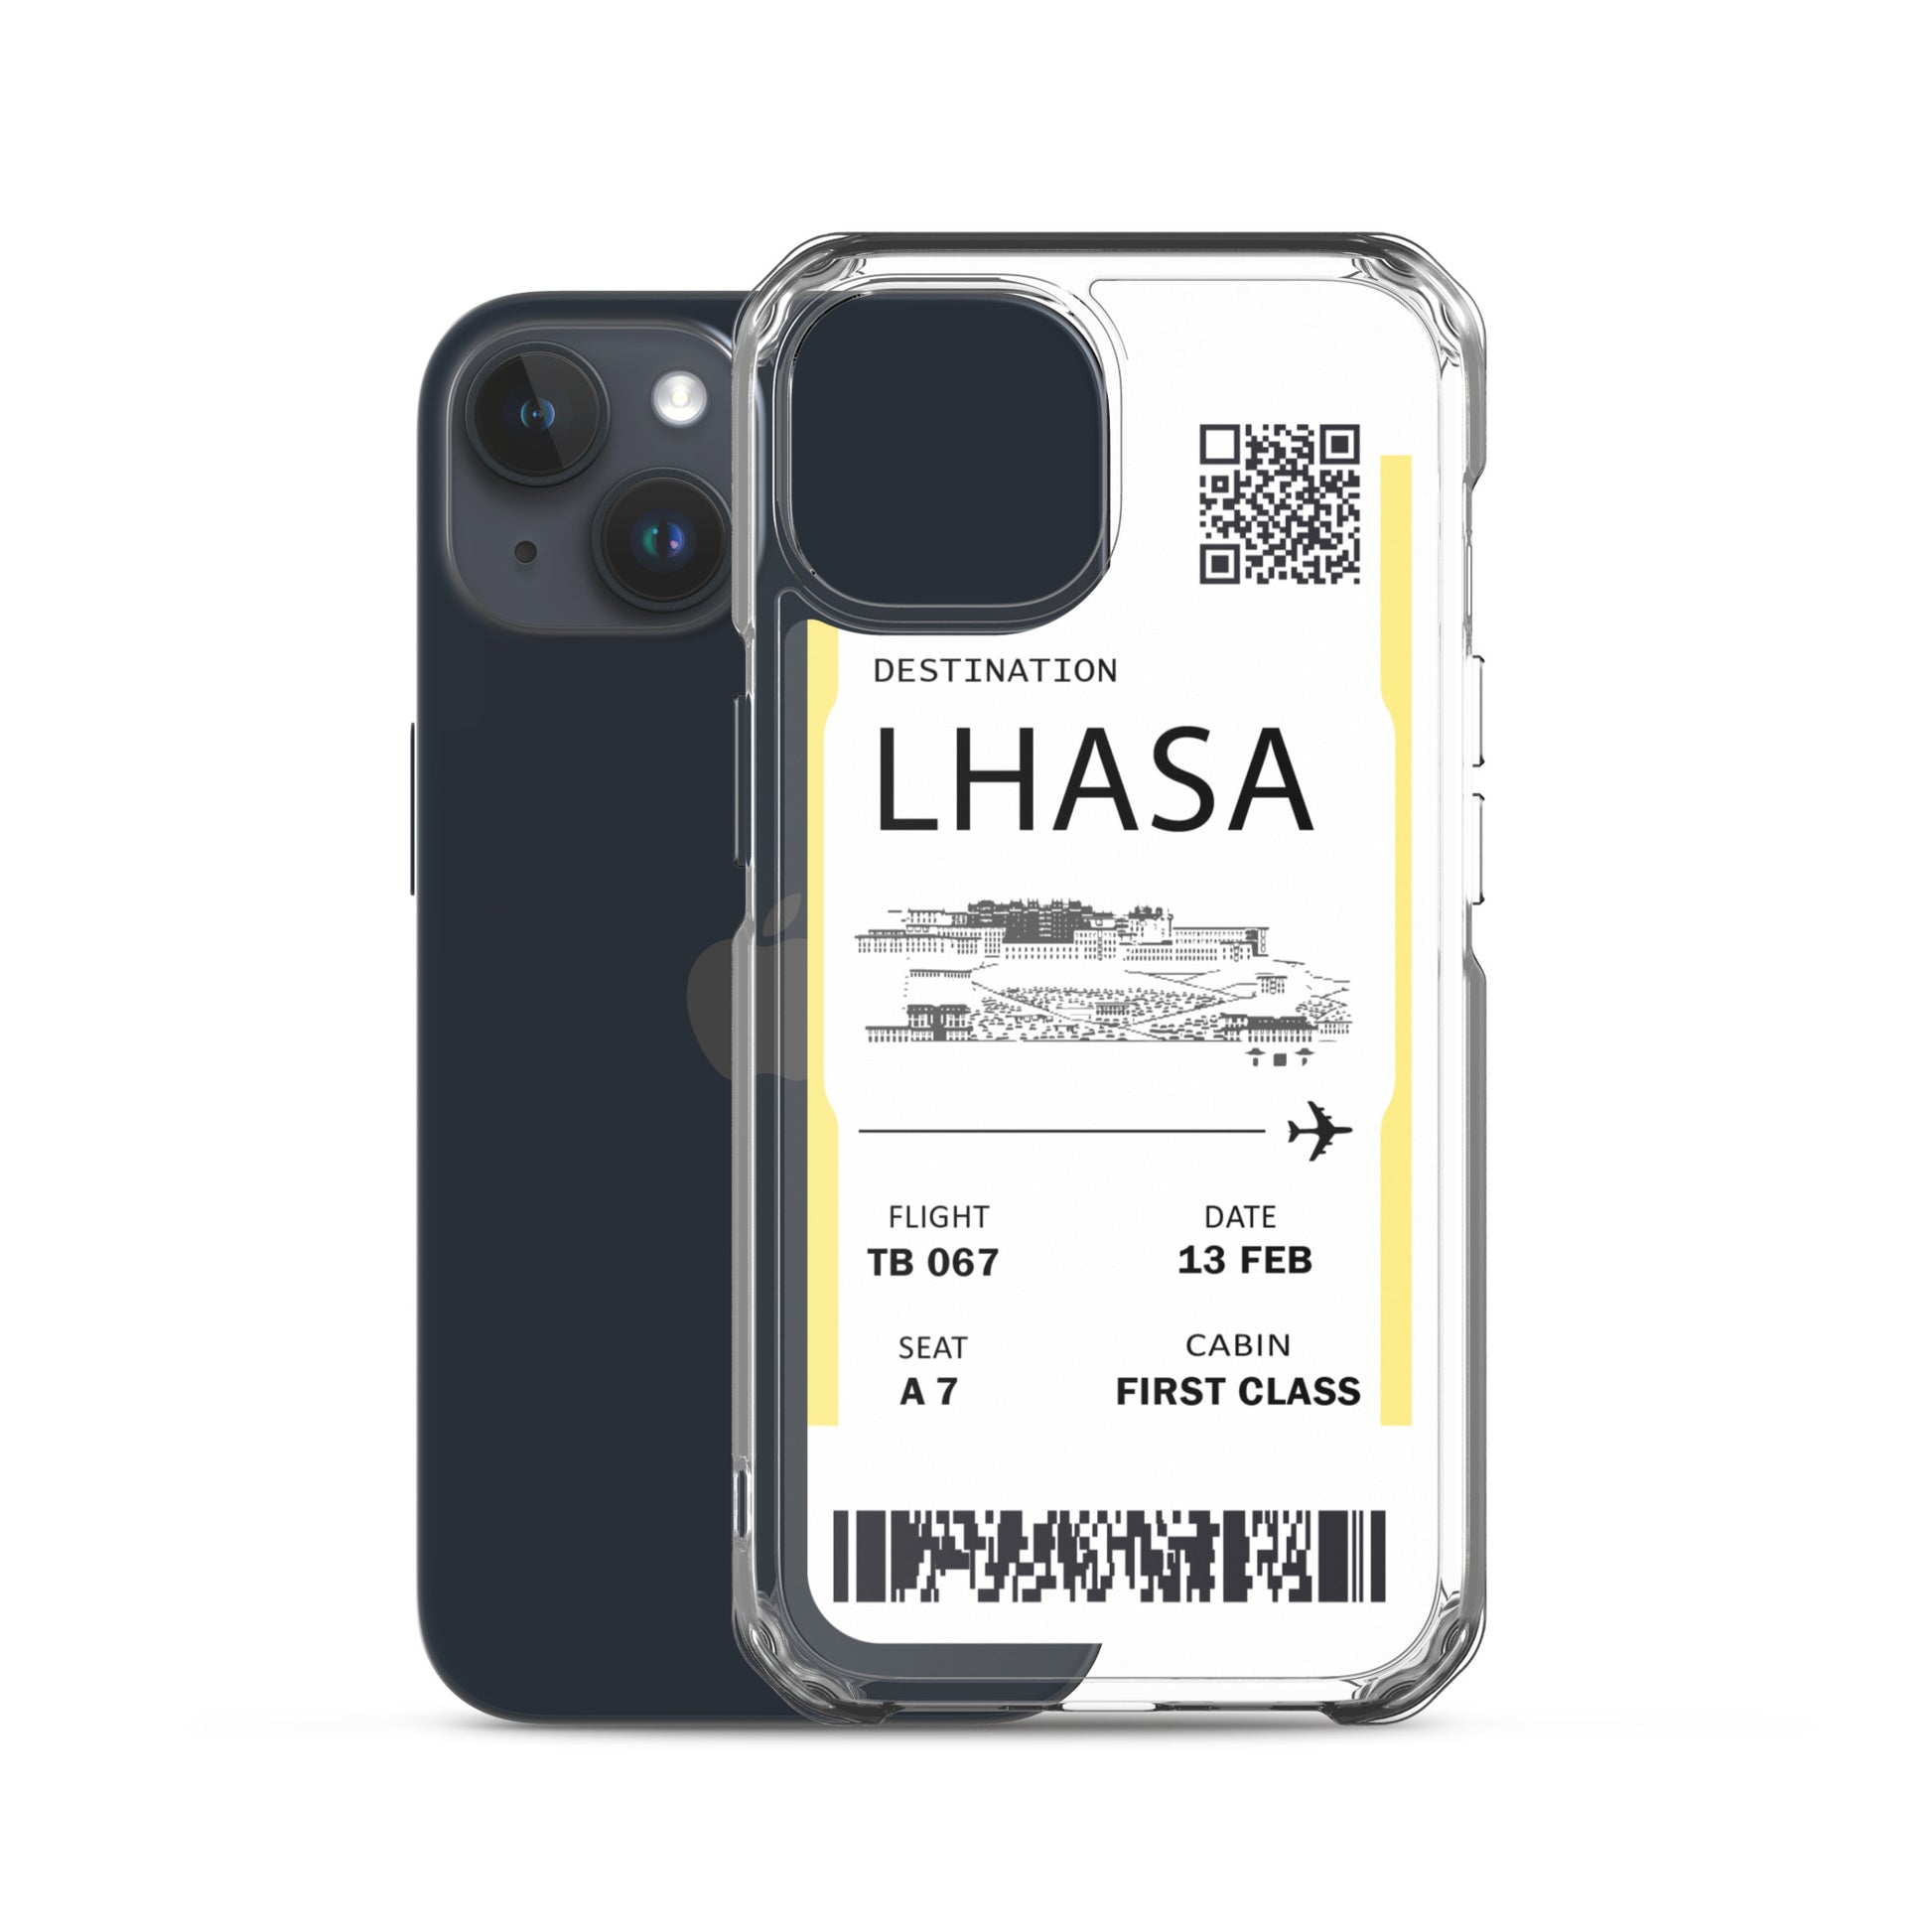 Lhasa Boarding iPhone case are designed under Dzimig Studios' Tibet Archive Project. These sleek clear iPhone case with Lhasa Boarding pass are available in three mild tone colors. 